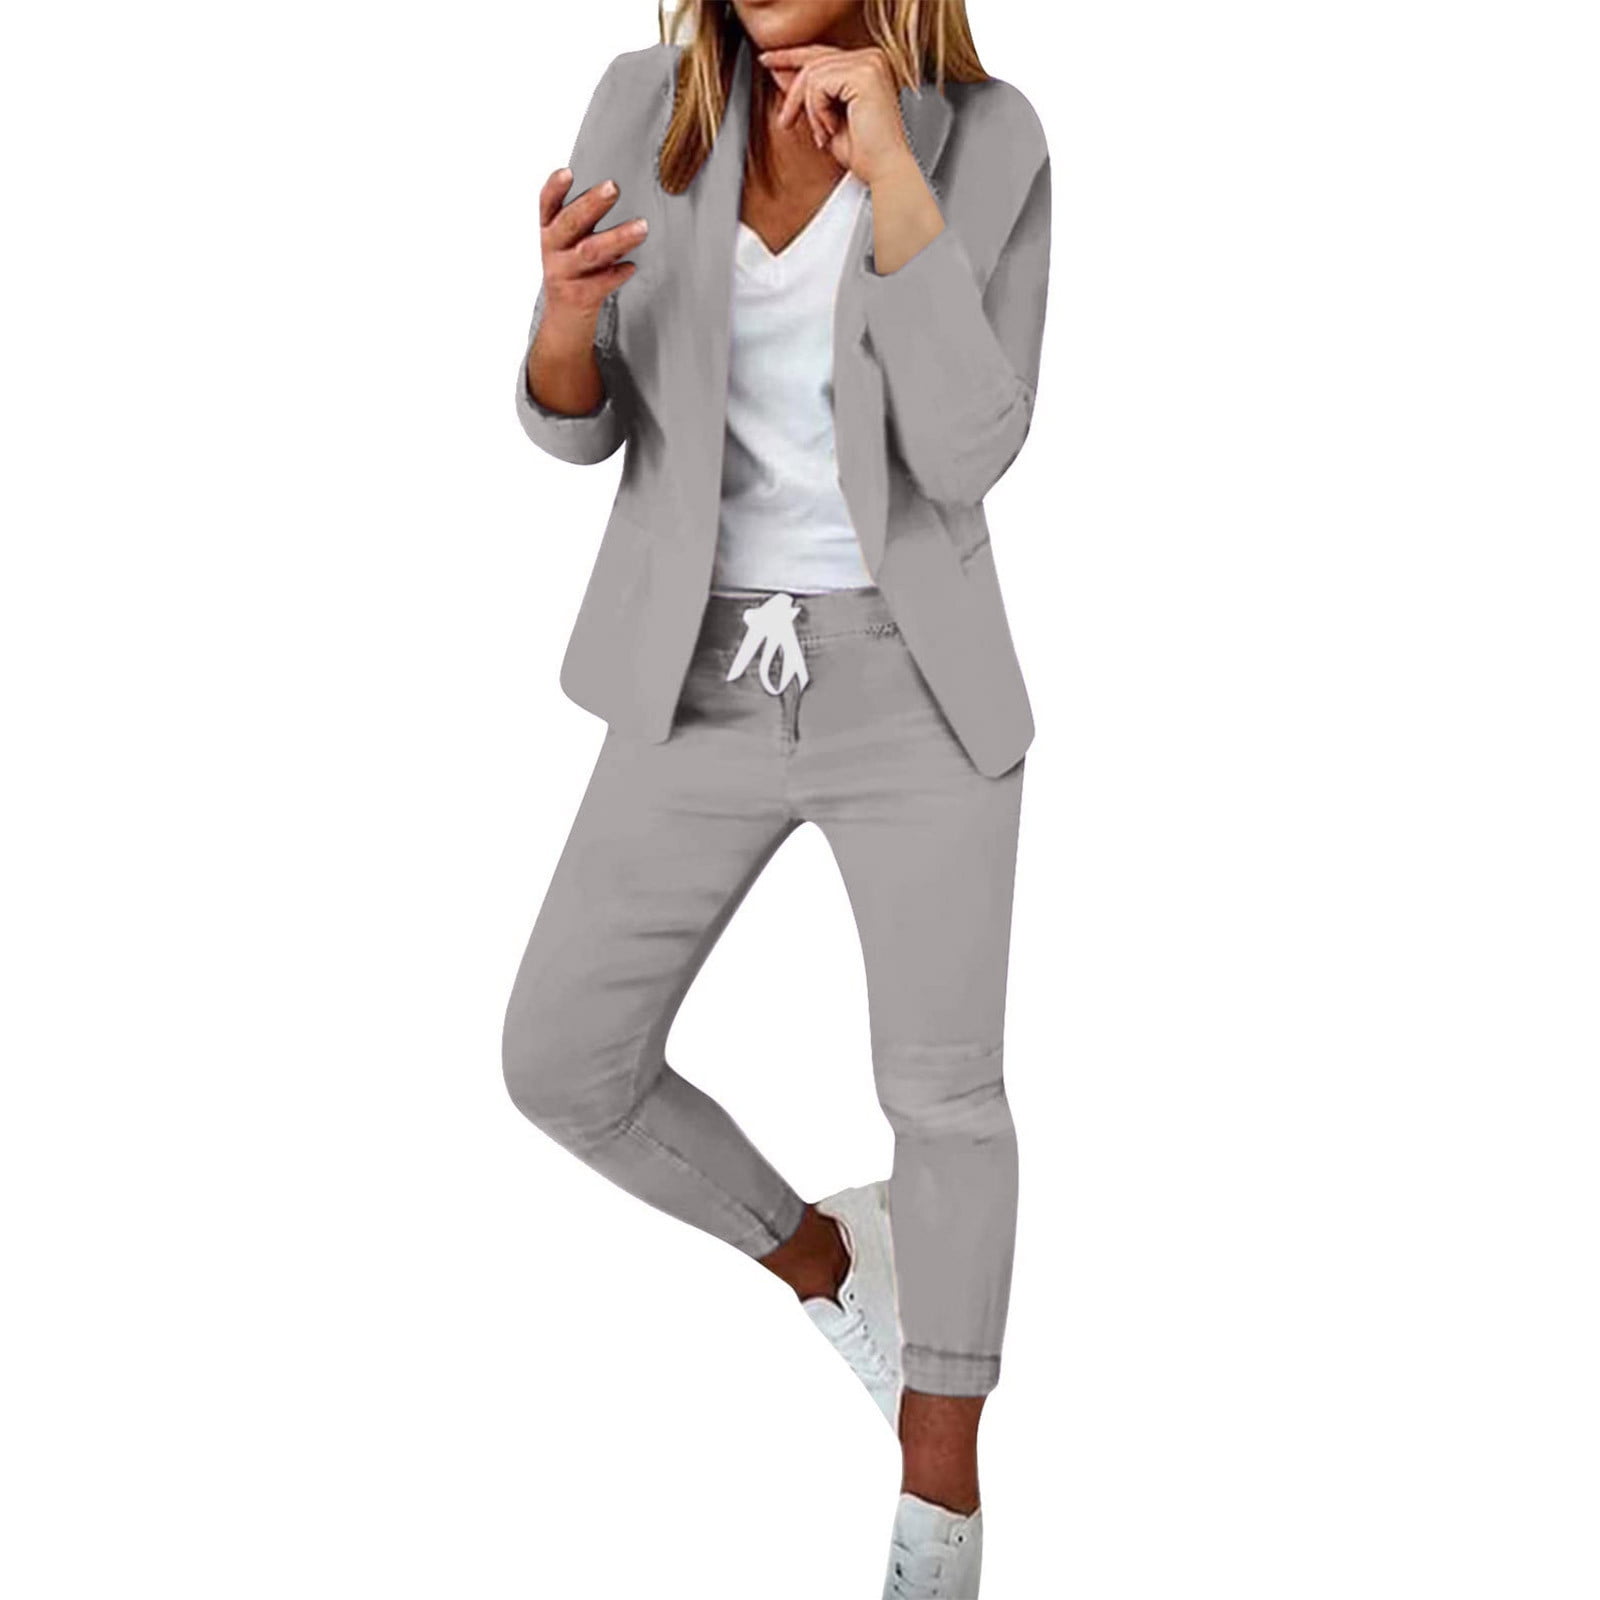 REORIAFEE Travel Outfits for Women 90s Outfit Women's Long Sleeve Suit  Pants Casual Elegant Business Suit Gray XL 